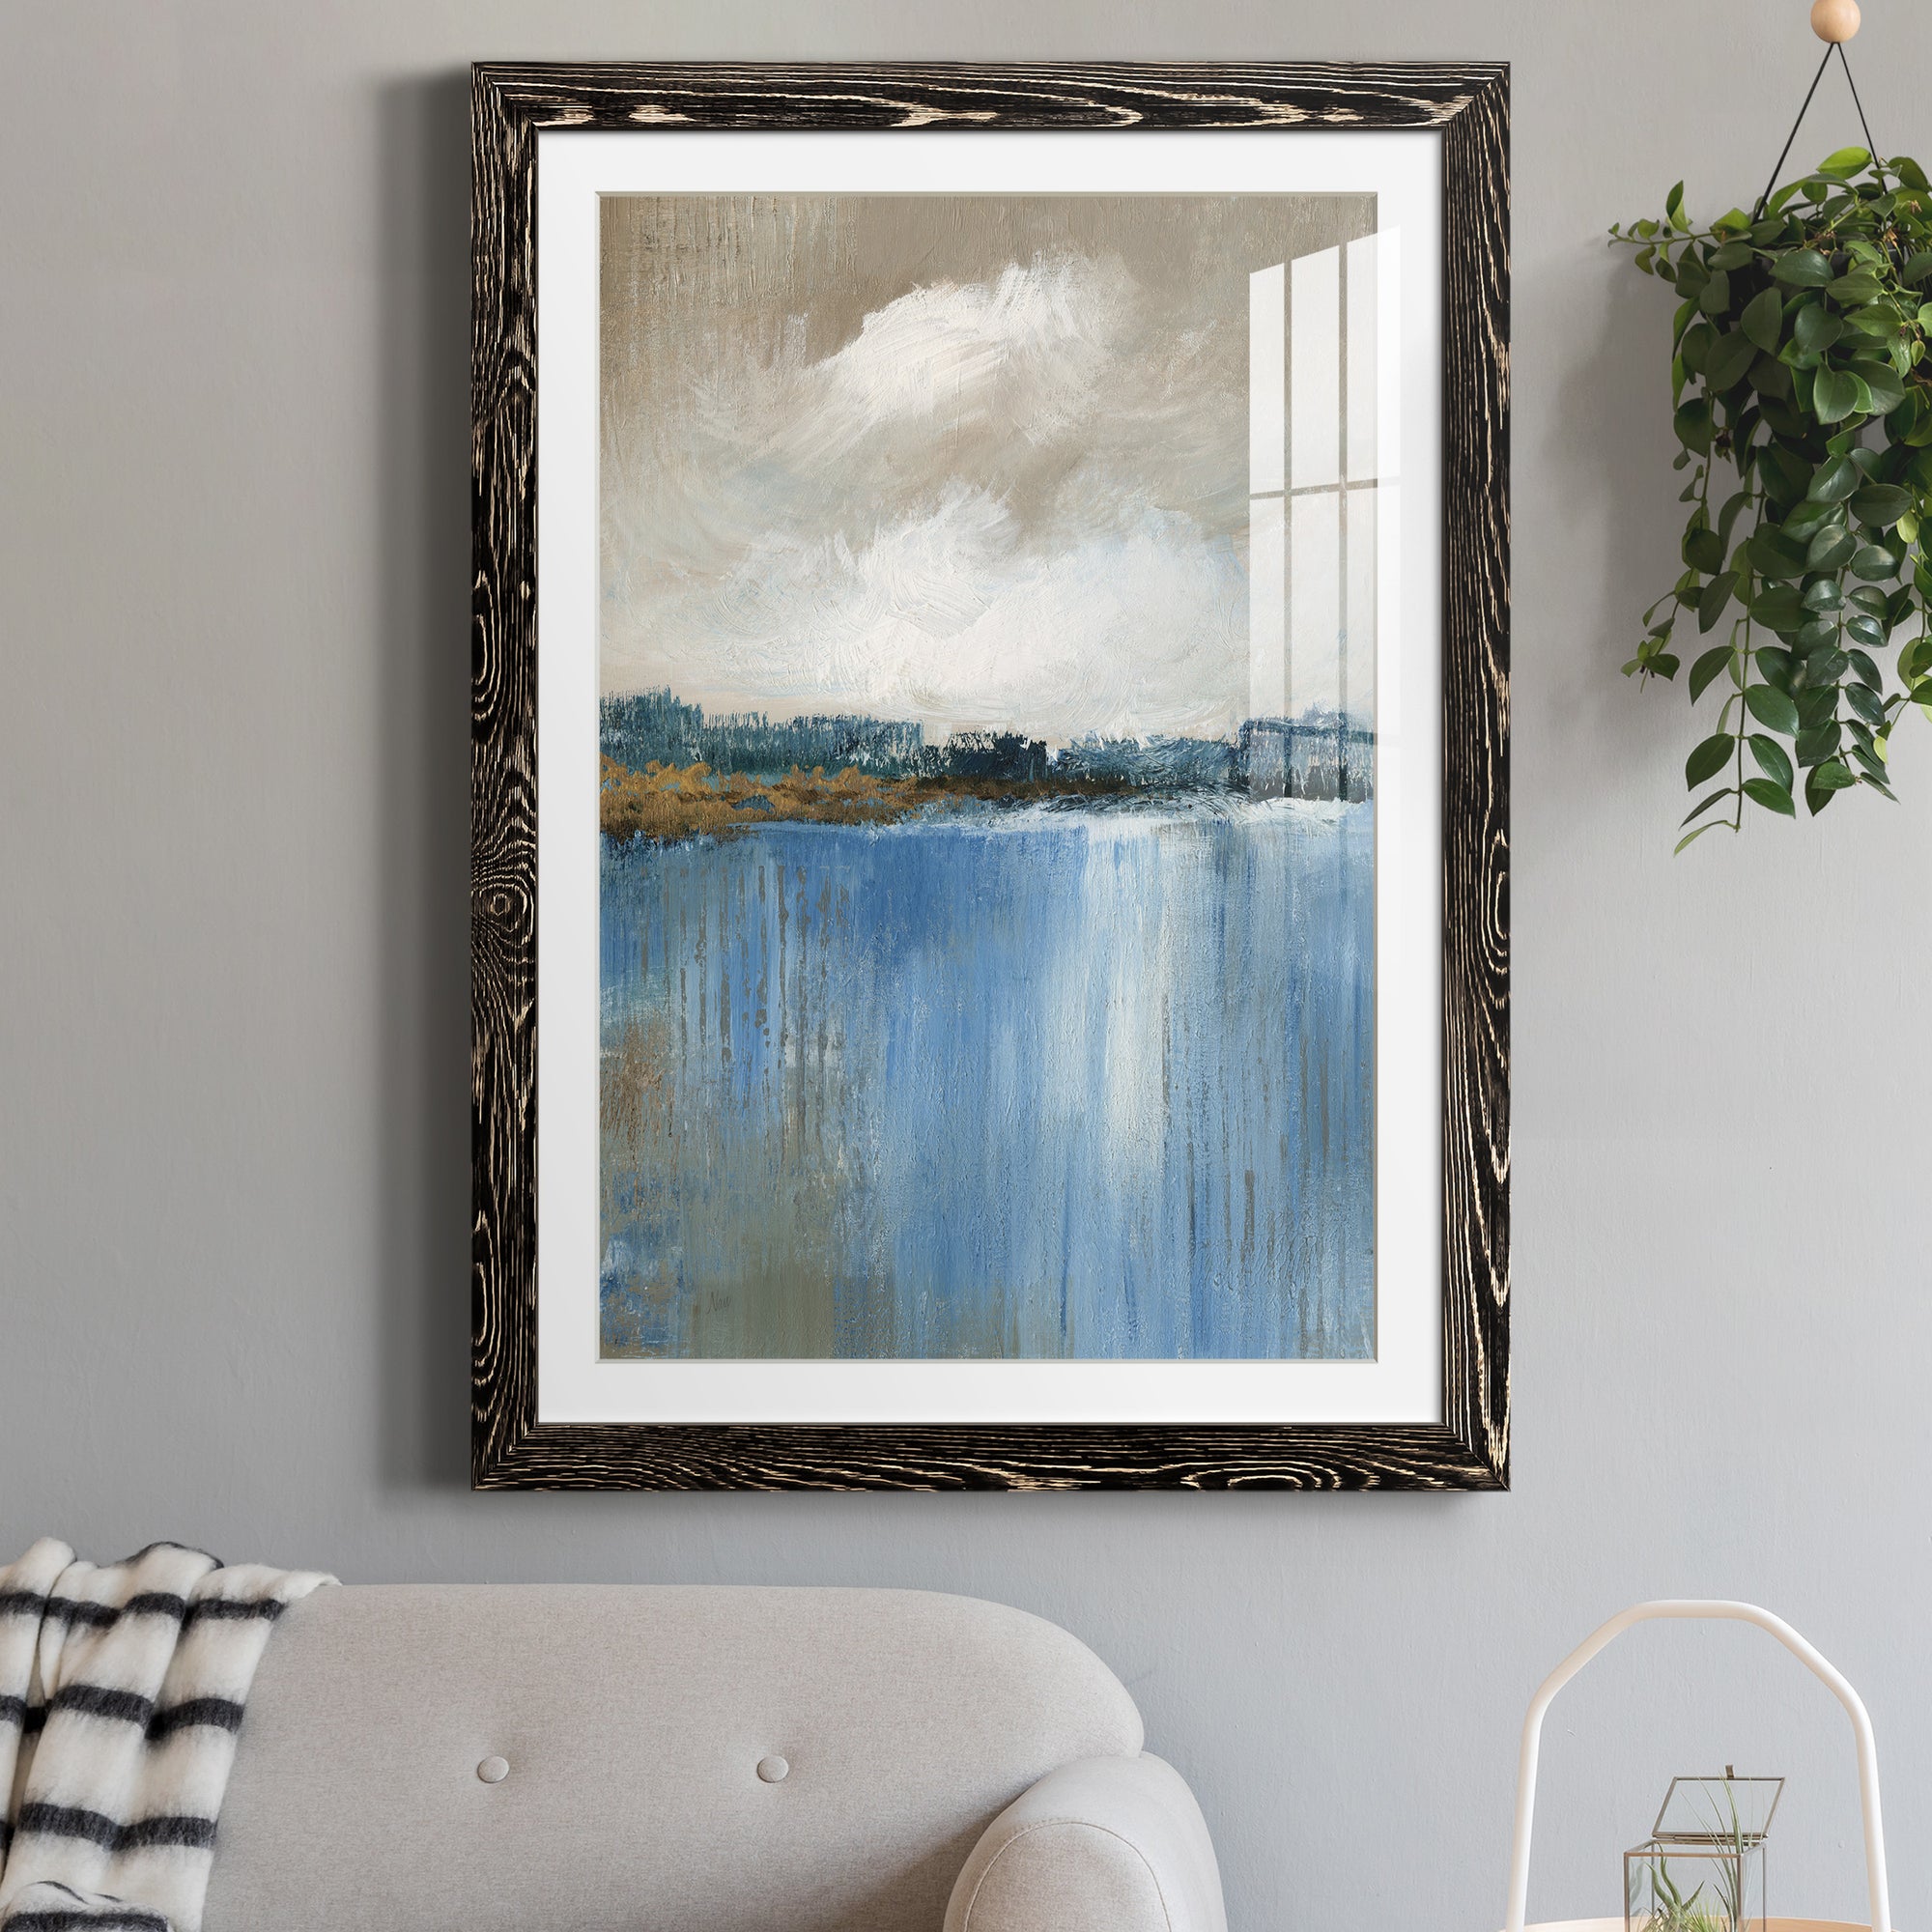 Wind and Water - Premium Framed Print - Distressed Barnwood Frame - Ready to Hang